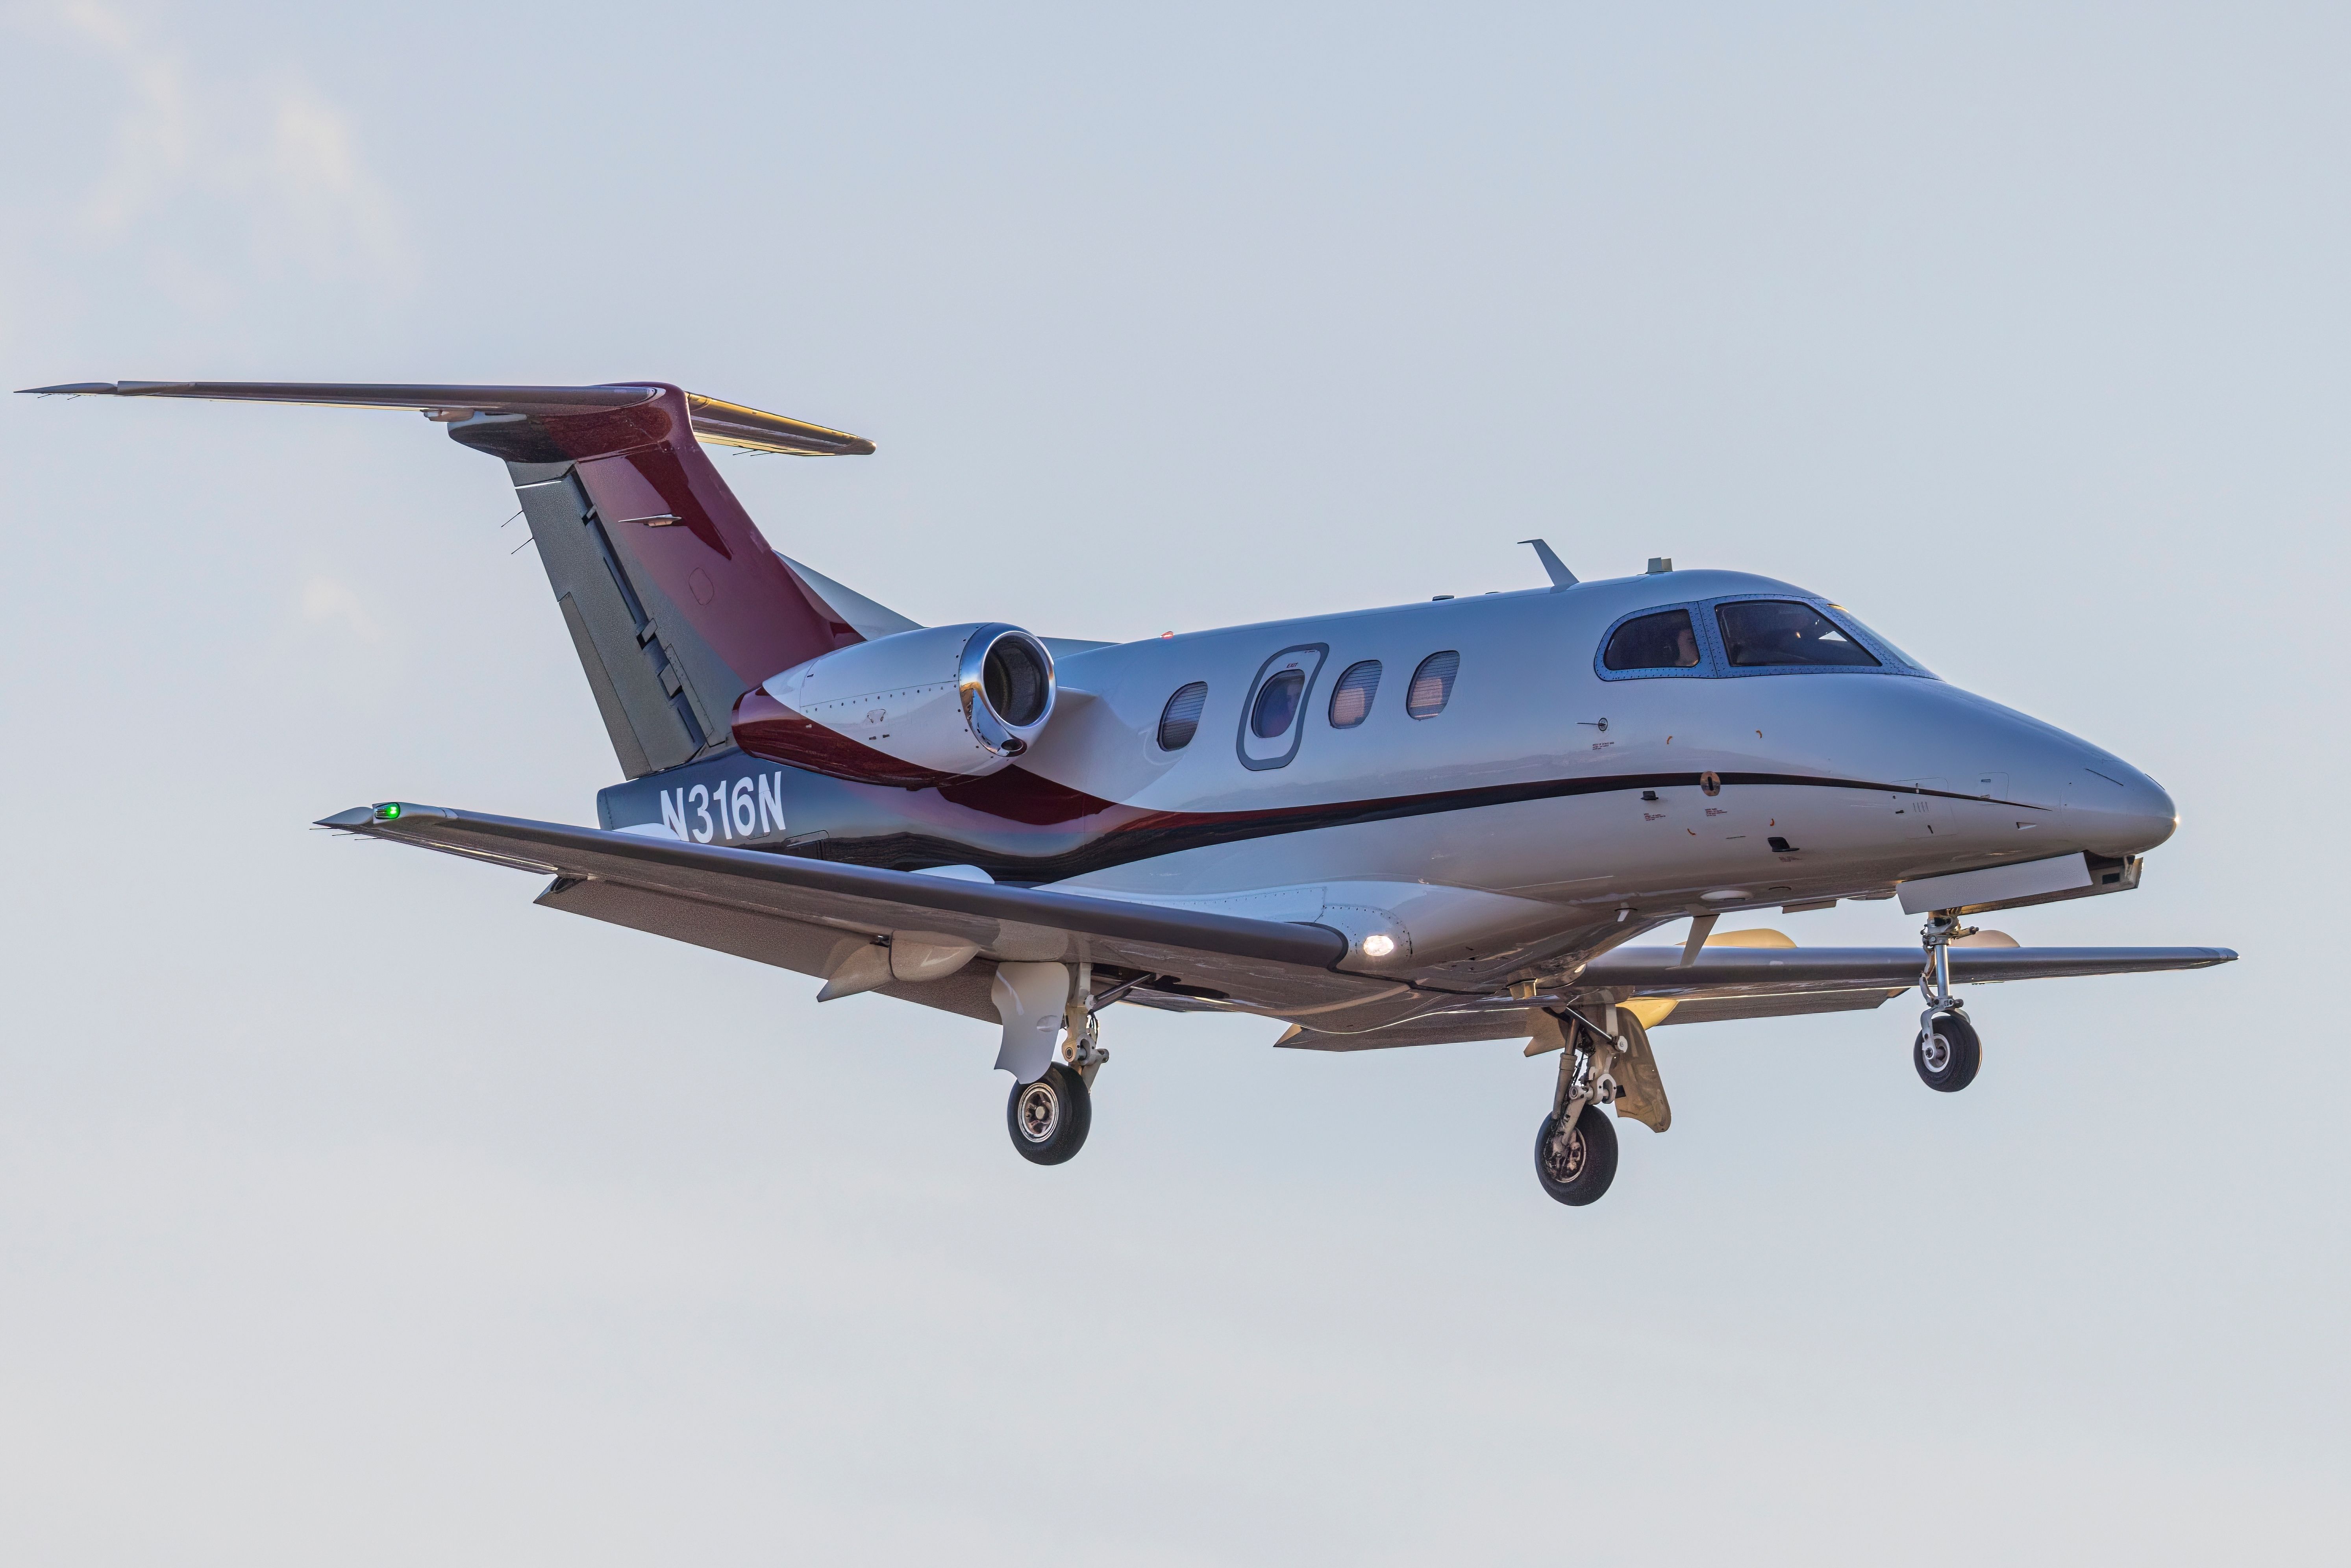 An Embraer Phenom EMB-500 arrives at the Centennial Airport at sunset